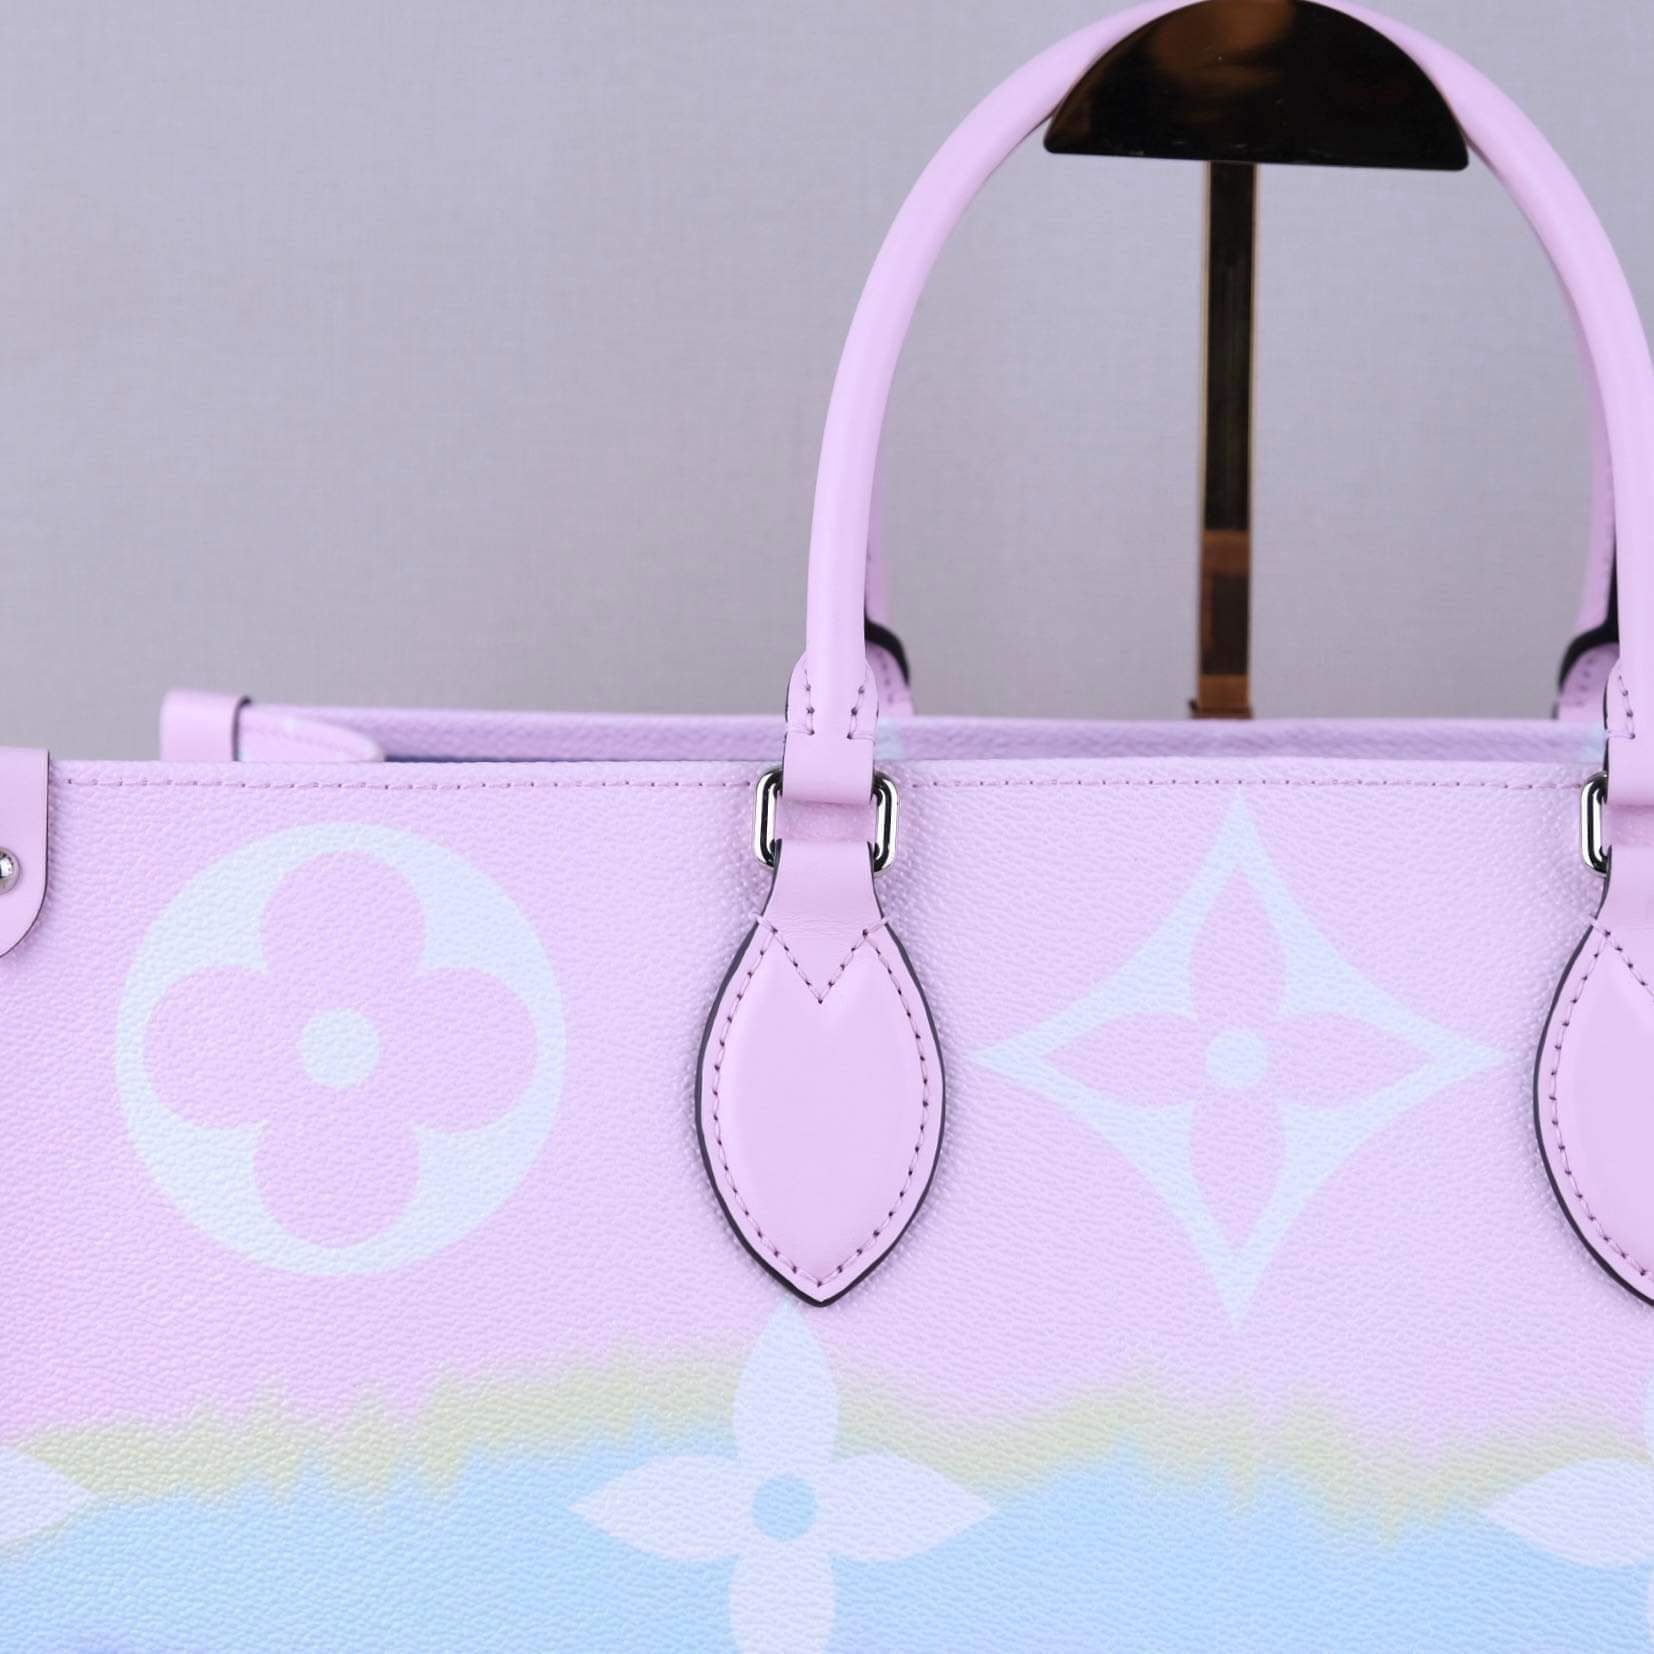 Louis+Vuitton+Neverfull+Tote+MM+Pastel+Pink+Escale+Monogram+Giant+Canvas+Limited+Edition  for sale online